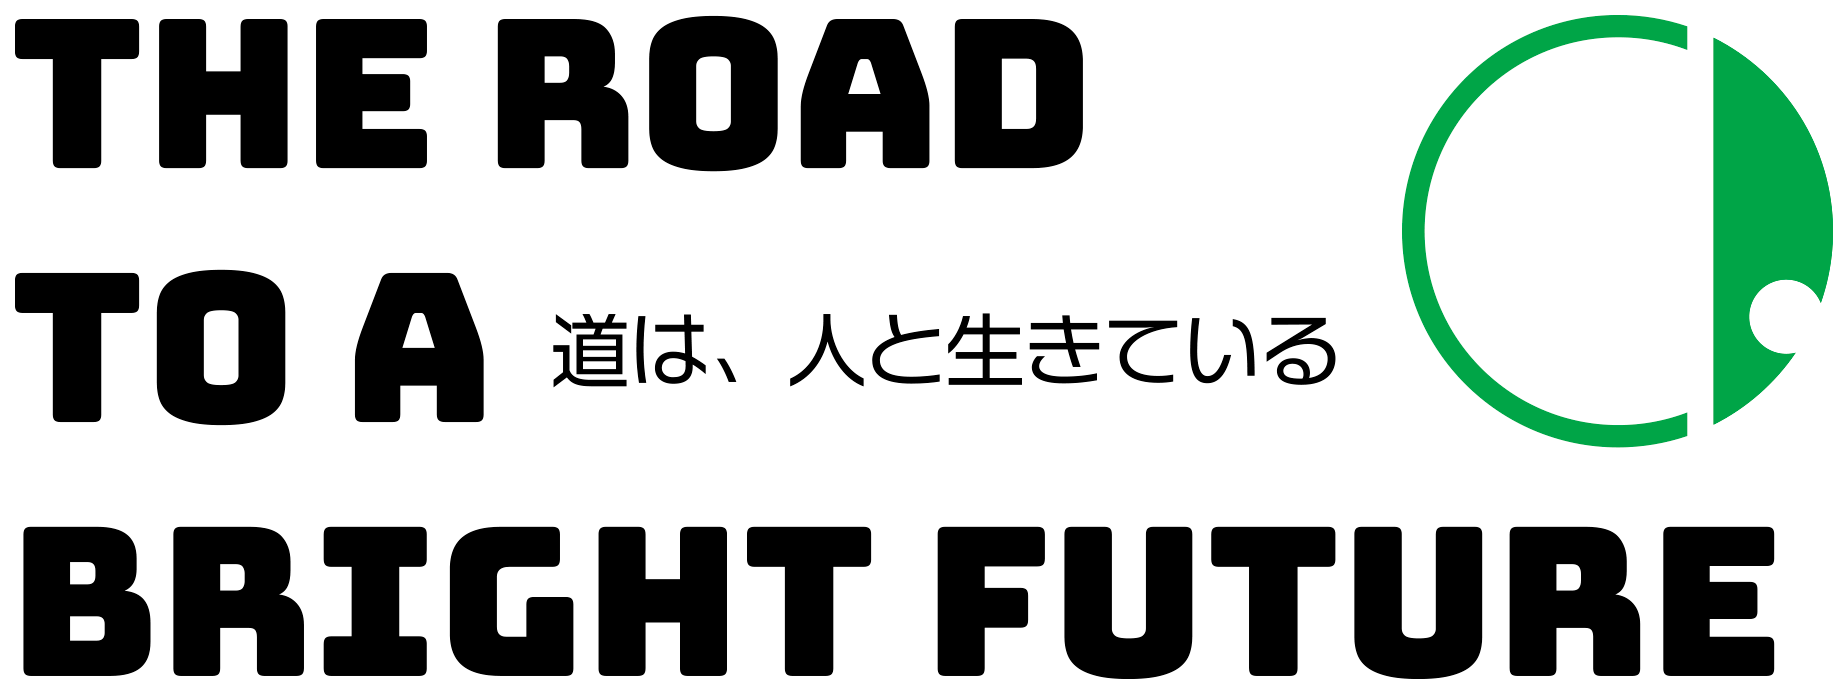 THE ROAD OF A BRIGHT FUTURE 道は人と生きている